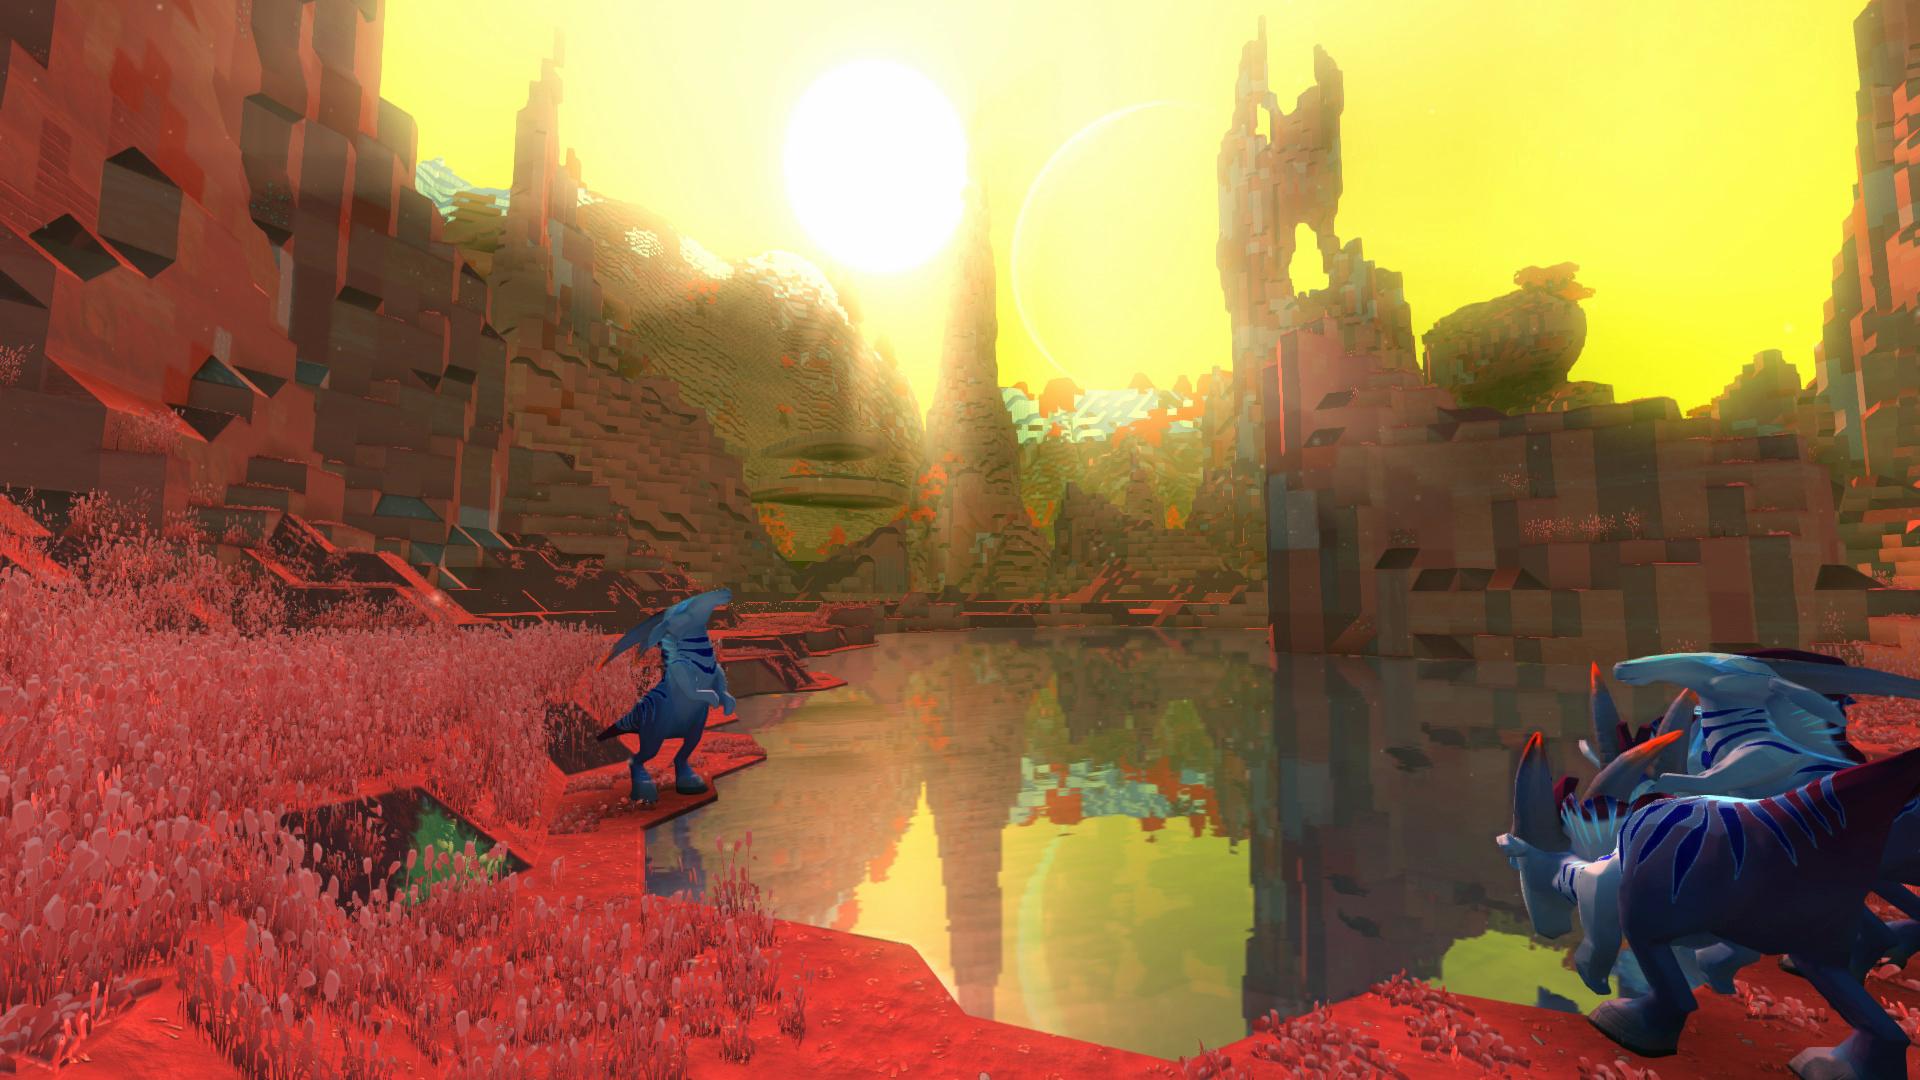 Screenshot №3 from game Boundless